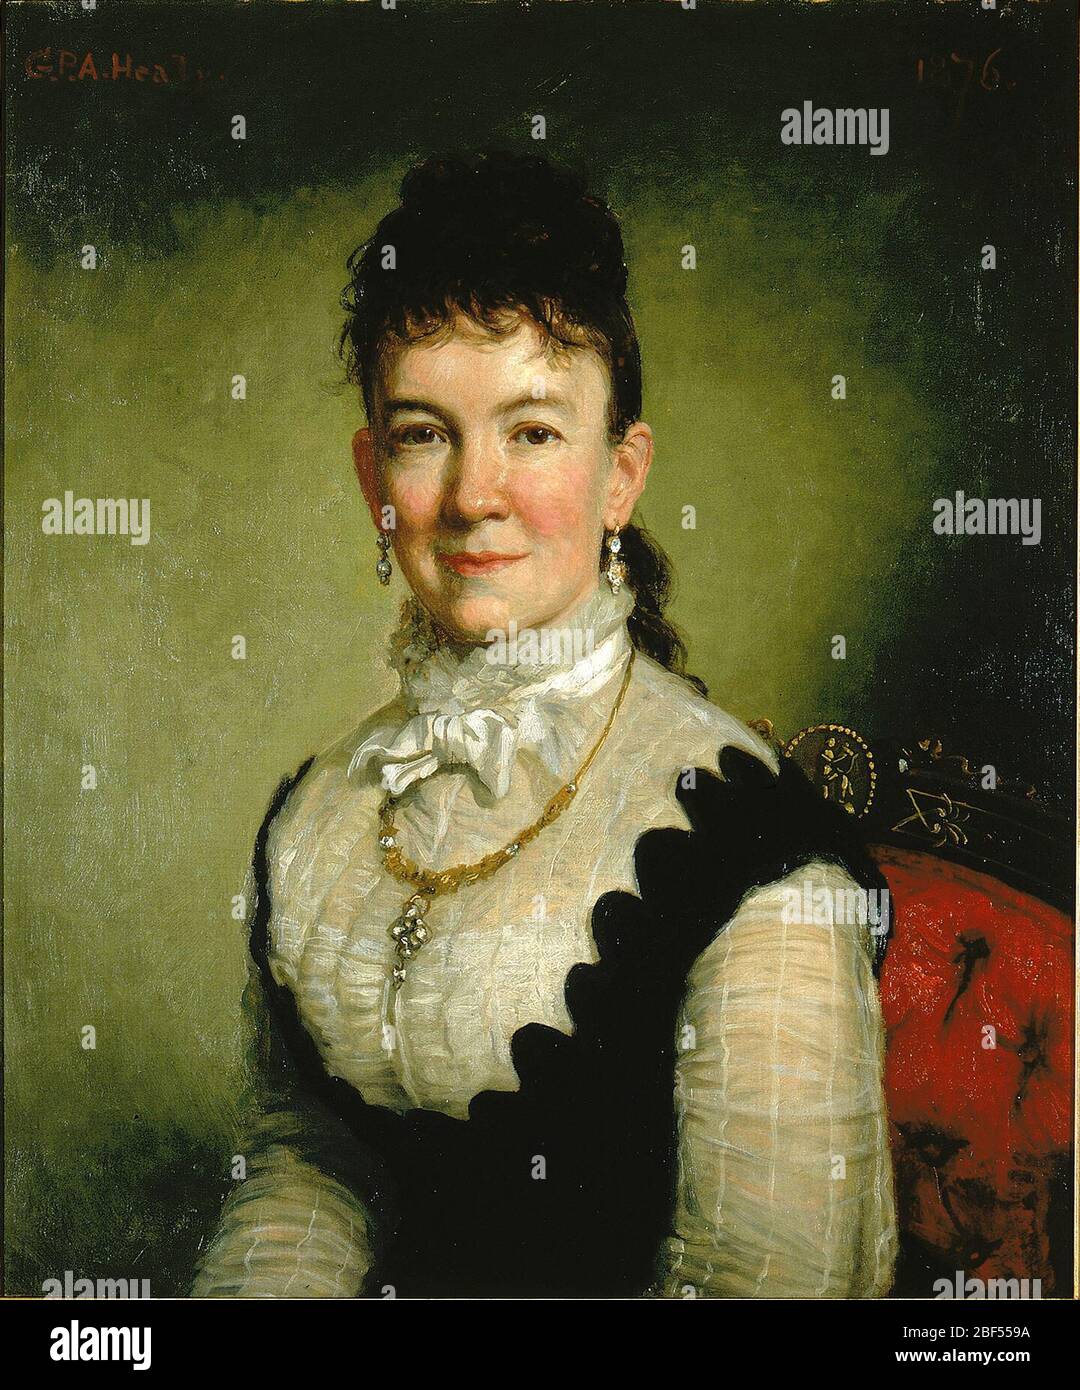 Mrs Albert J Myer Catherine Walden. Catherine Walden was the wife of General Albert J. Myer, who established the Army Signal Corps during the Civil War. In this lively portrait, George Healy shows Mrs. Myer with a twinkle in her eye and a knowing grin. Stock Photo